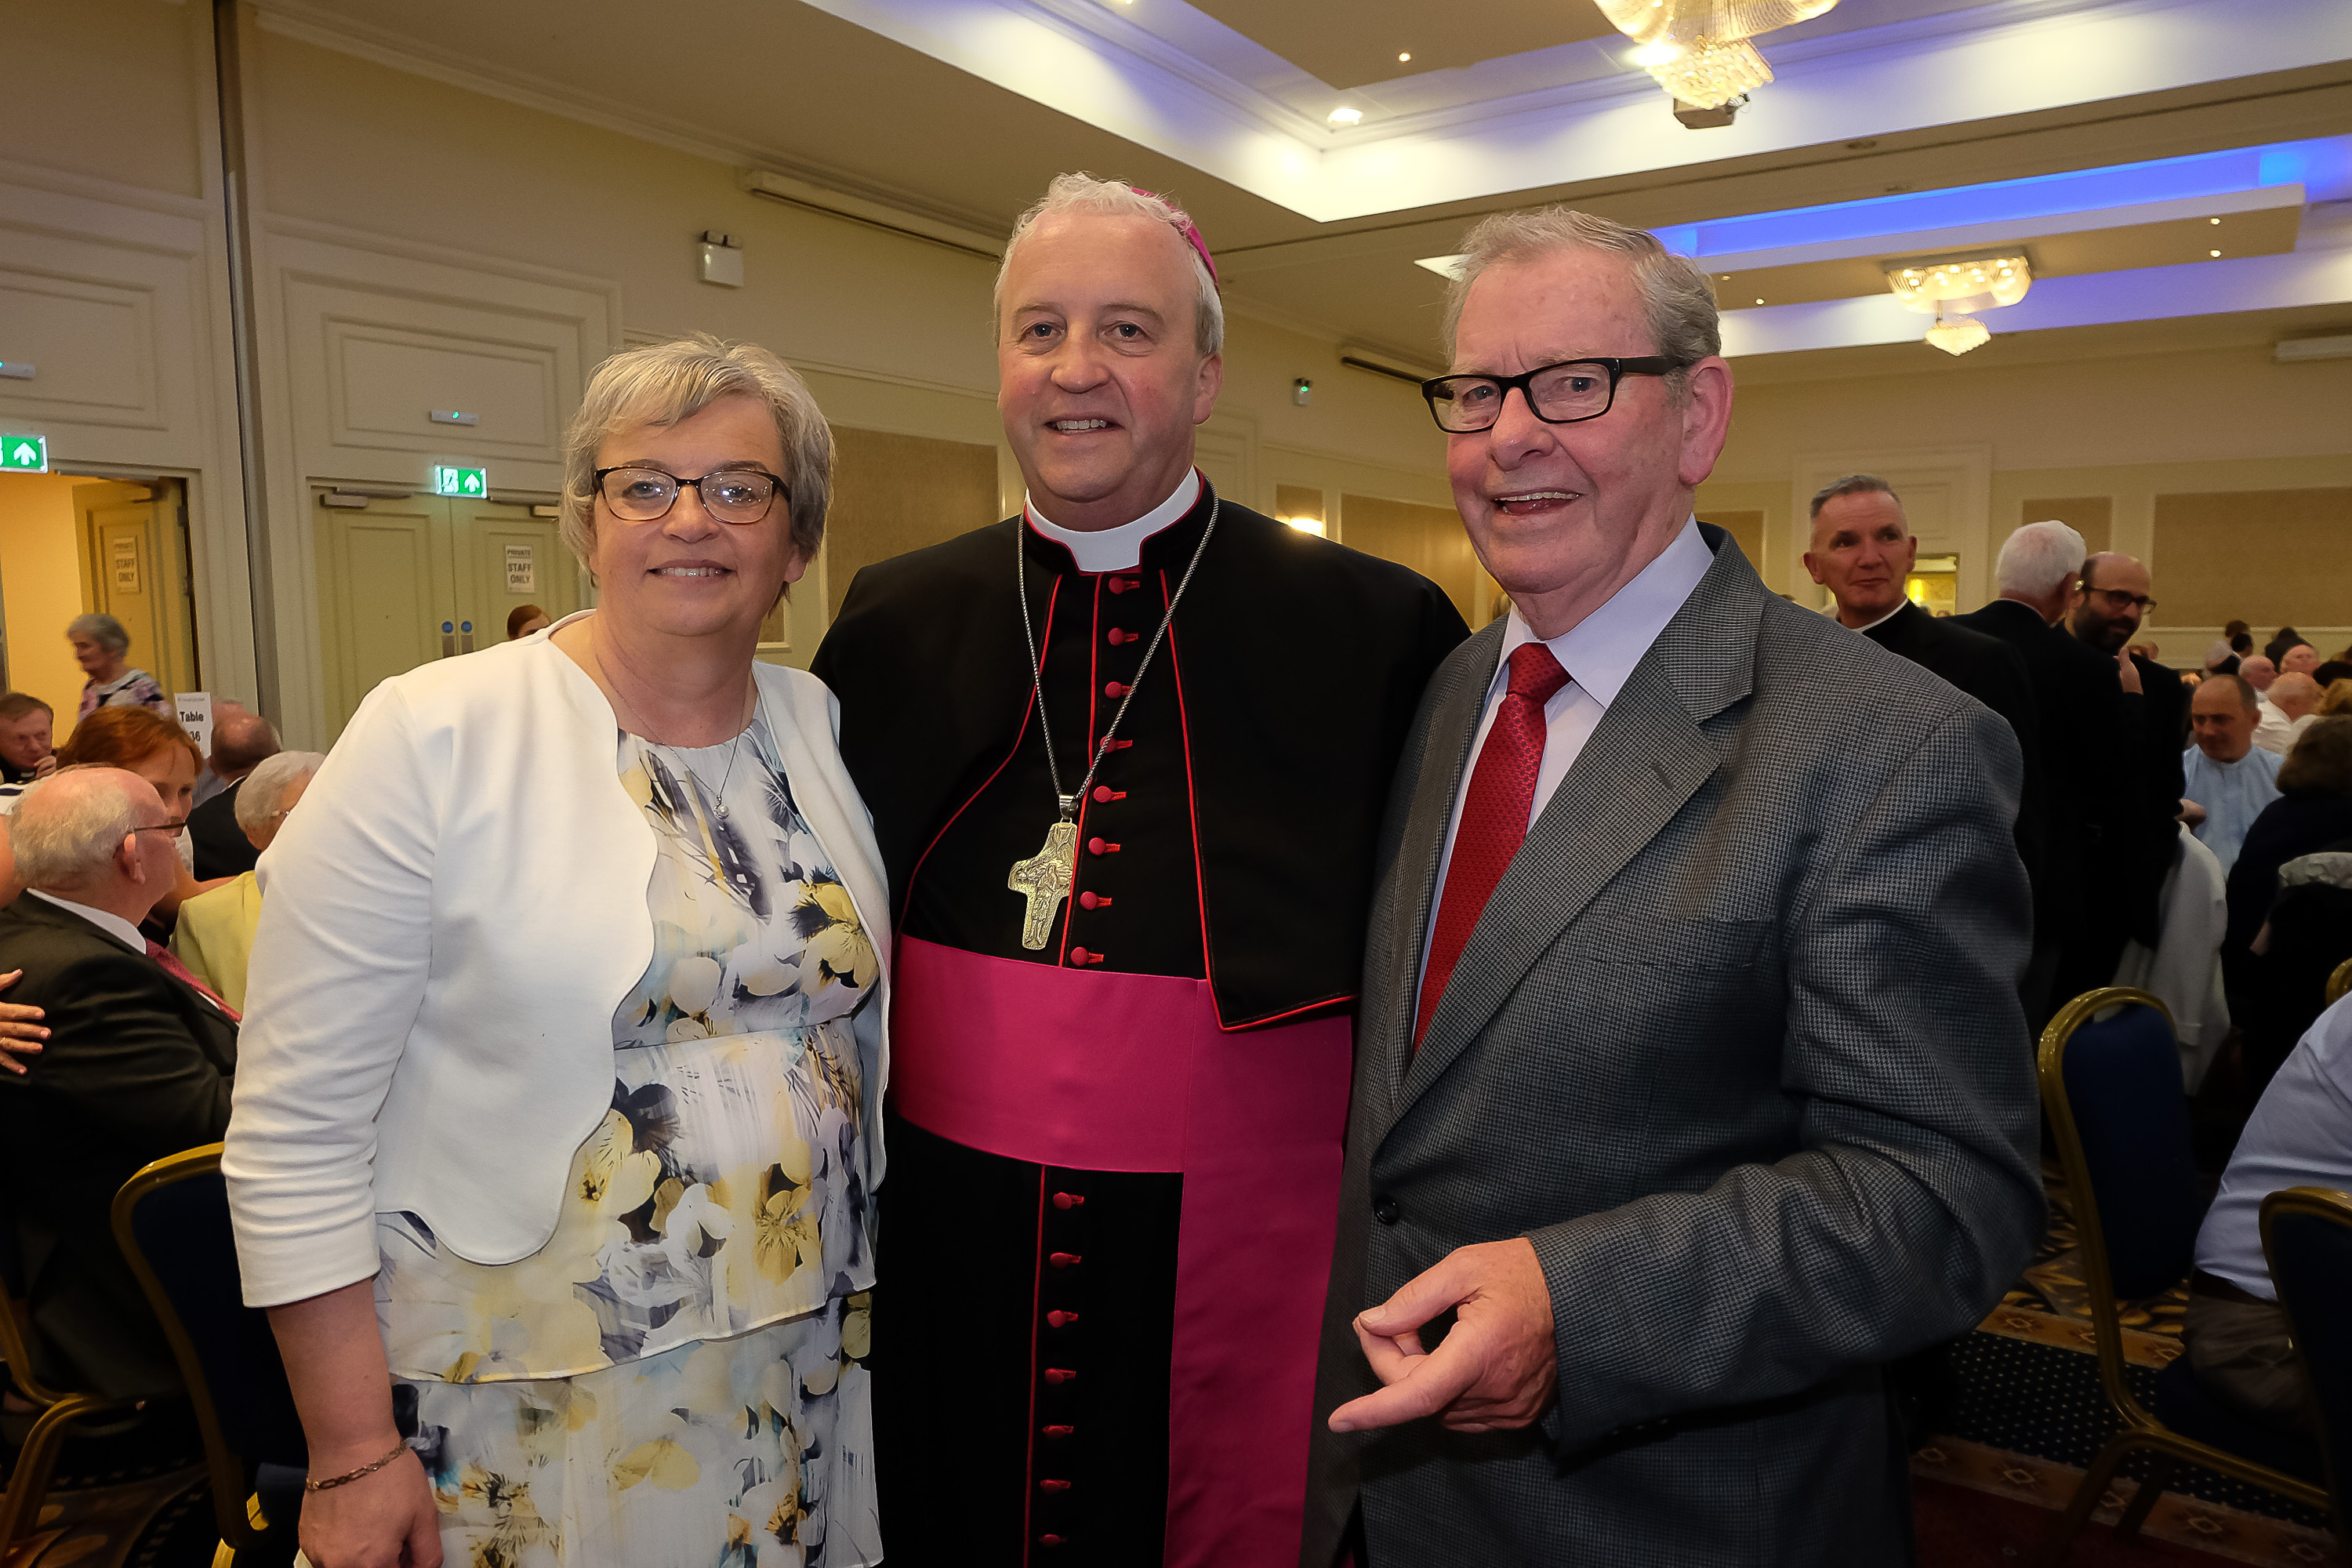 The new Bishop Michael Router, with his sister Breda Murphy, and his godfather Michael Murphy, at a celebration dinner following the Bishop's Ordination Armagh City Hotel, Armagh,  21 July 2019Credit: LiamMcArdle.com